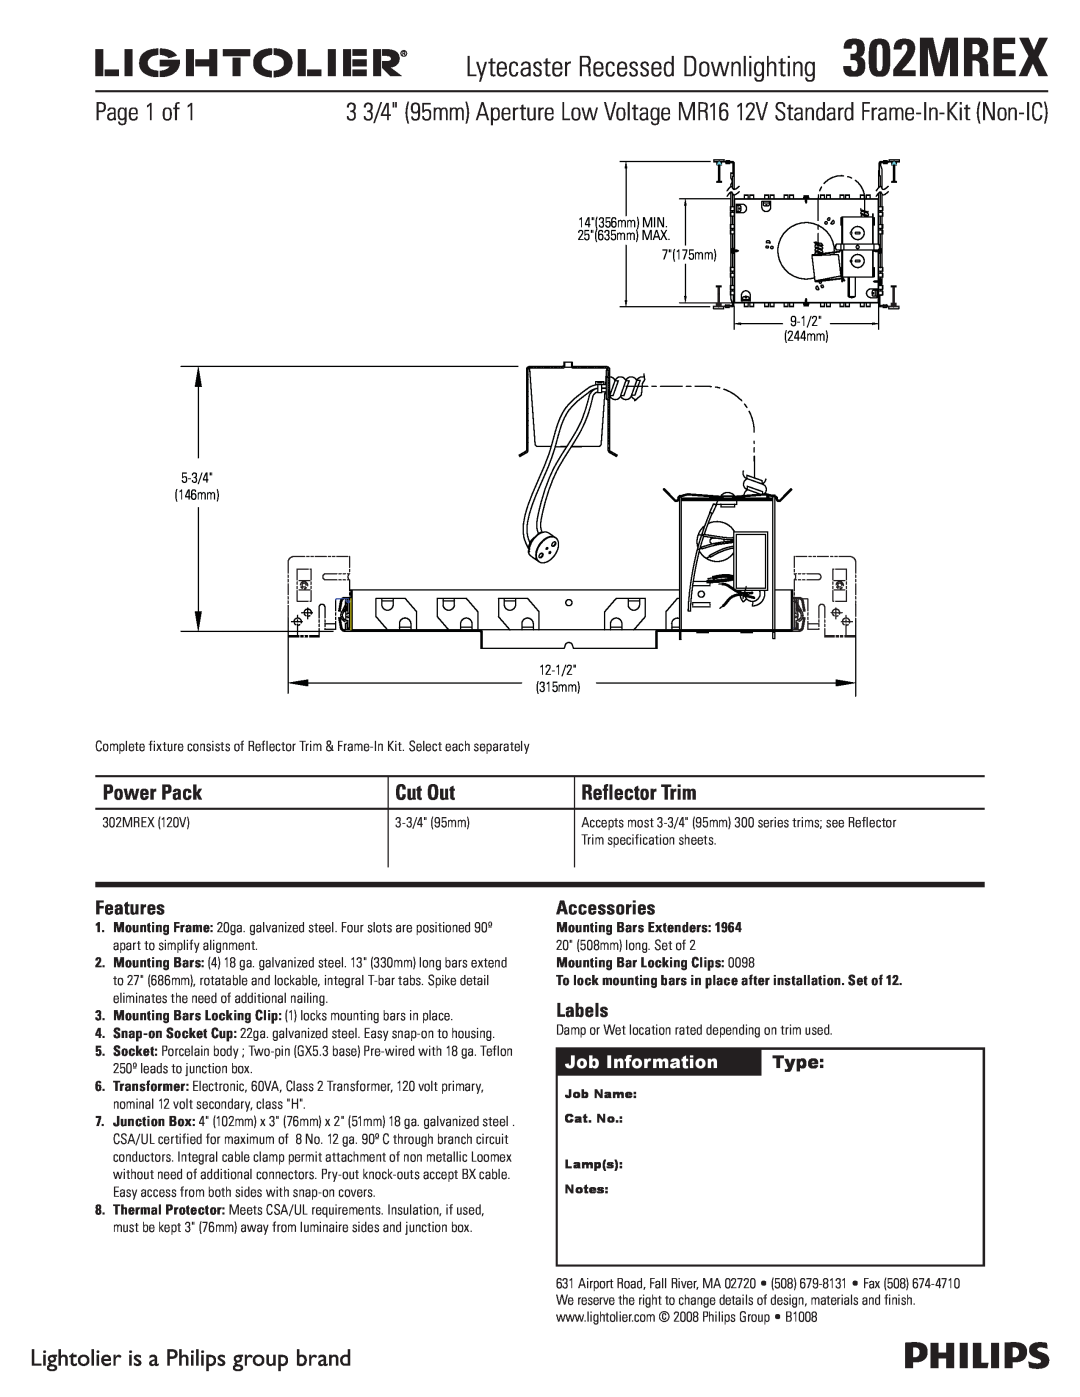 Lightolier specifications Lytecaster Recessed Downlighting302MREX, Page 1 of, Lightolier is a Philips group brand, Type 